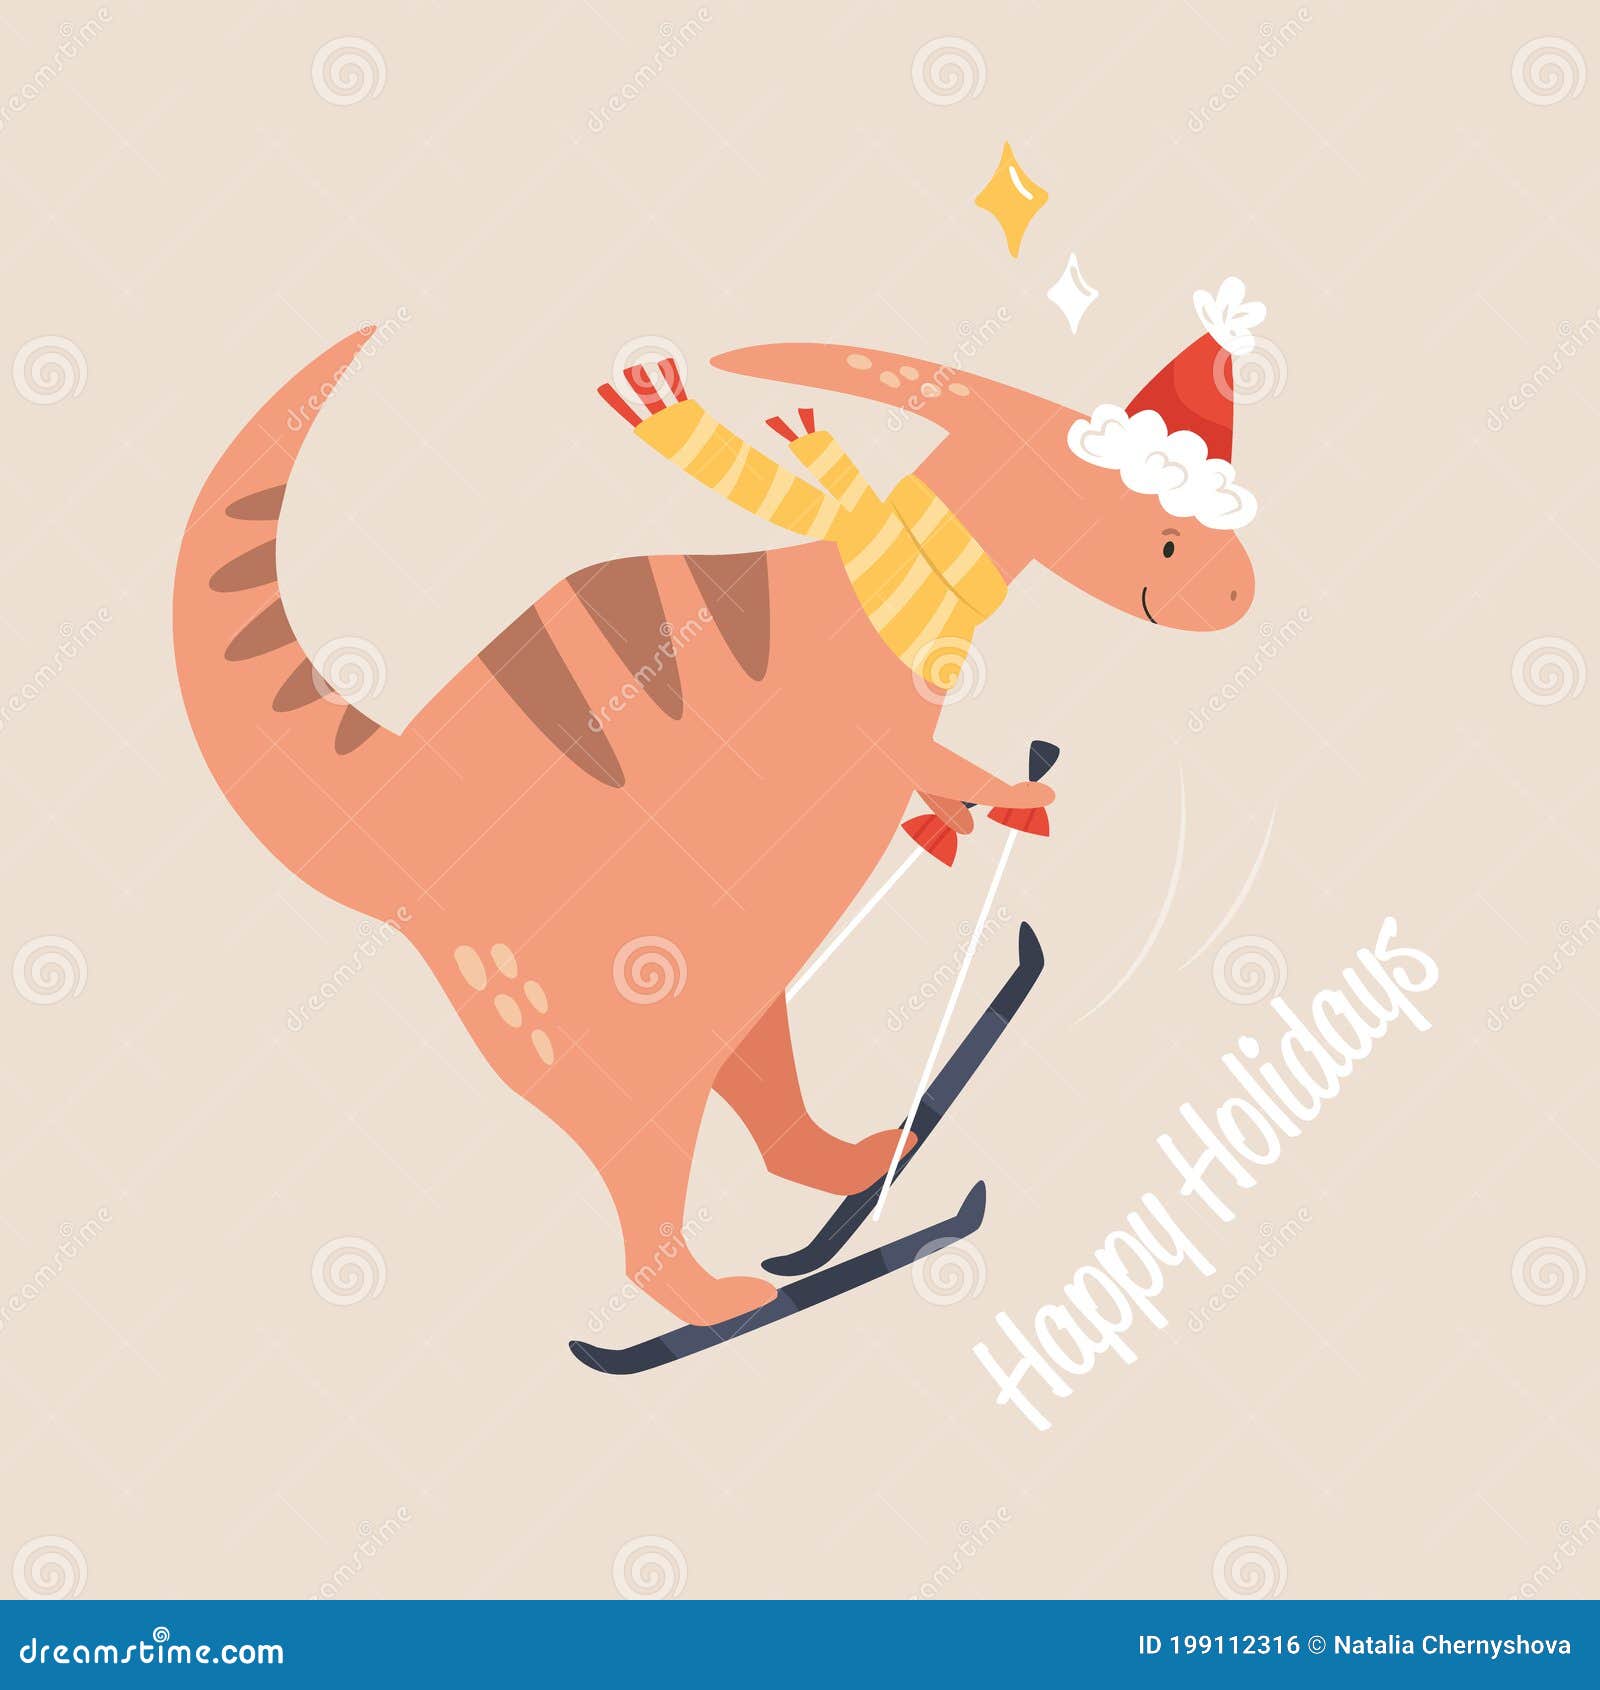 Funny Flat Illustration with Dino Going Ski. Cute Cartoon Print or Holiday  Card Stock Vector - Illustration of design, birthday: 199112316